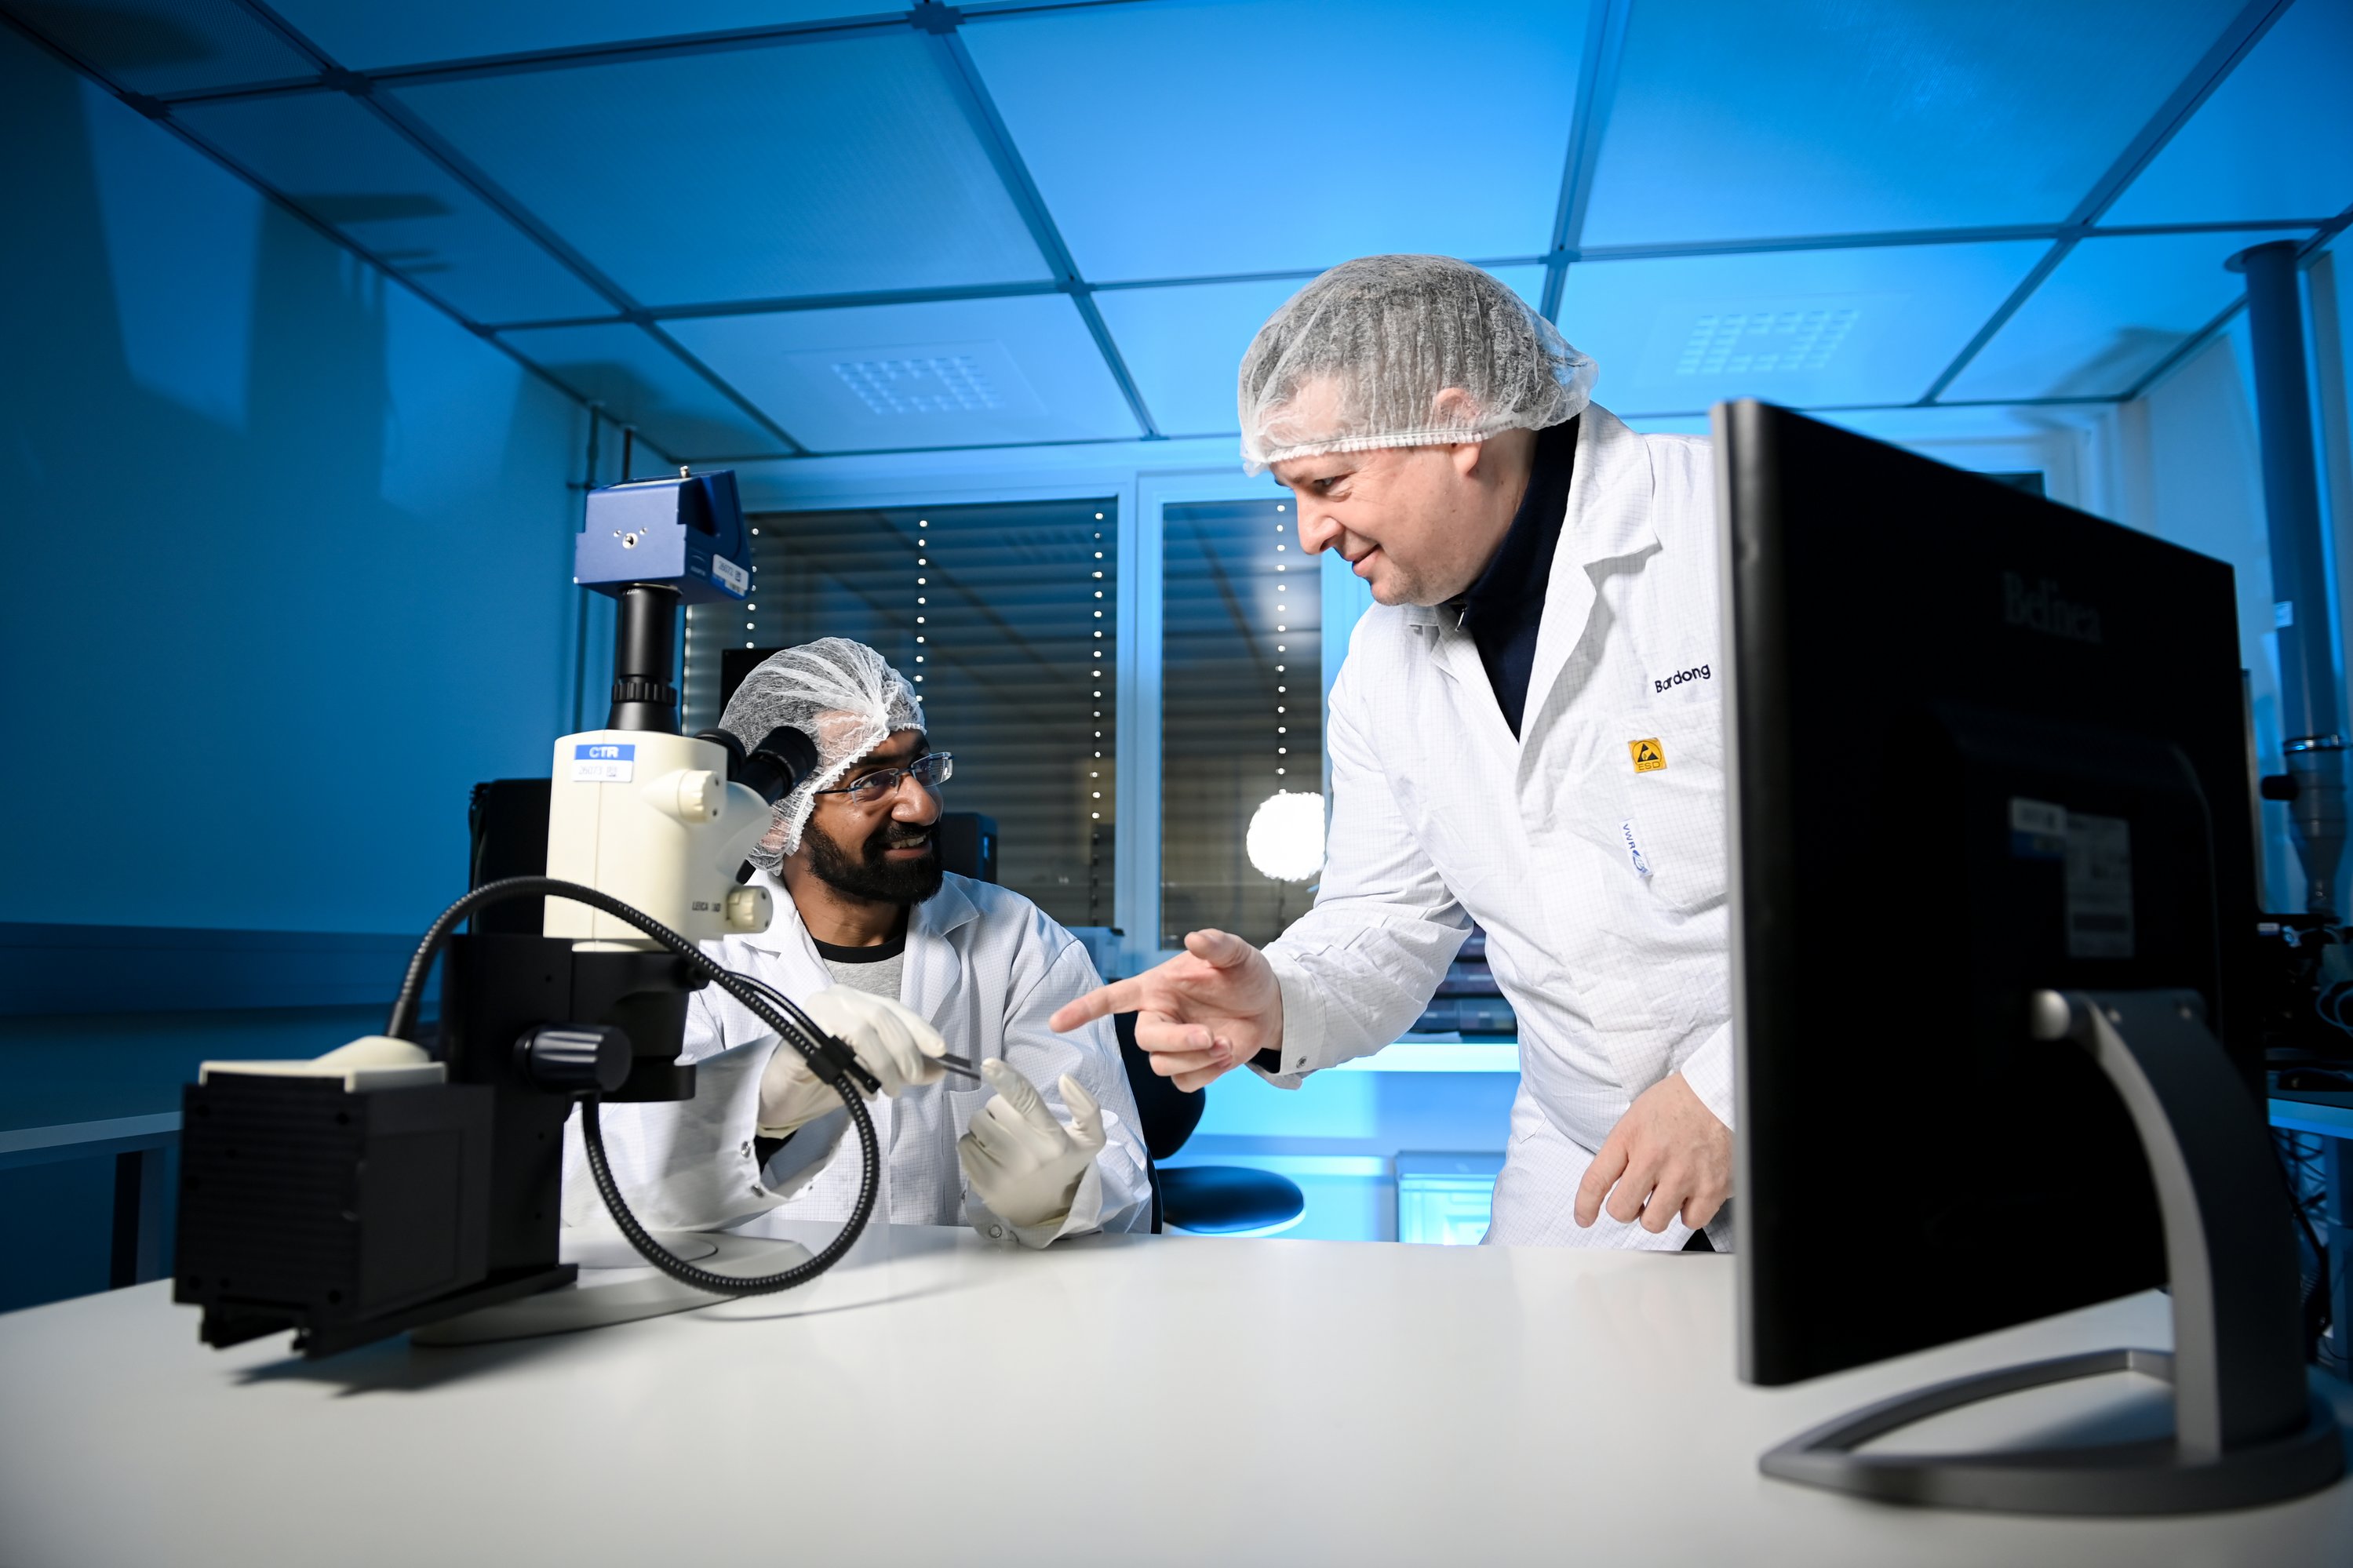 two researchers in the cleanroom, wearing protective clothing